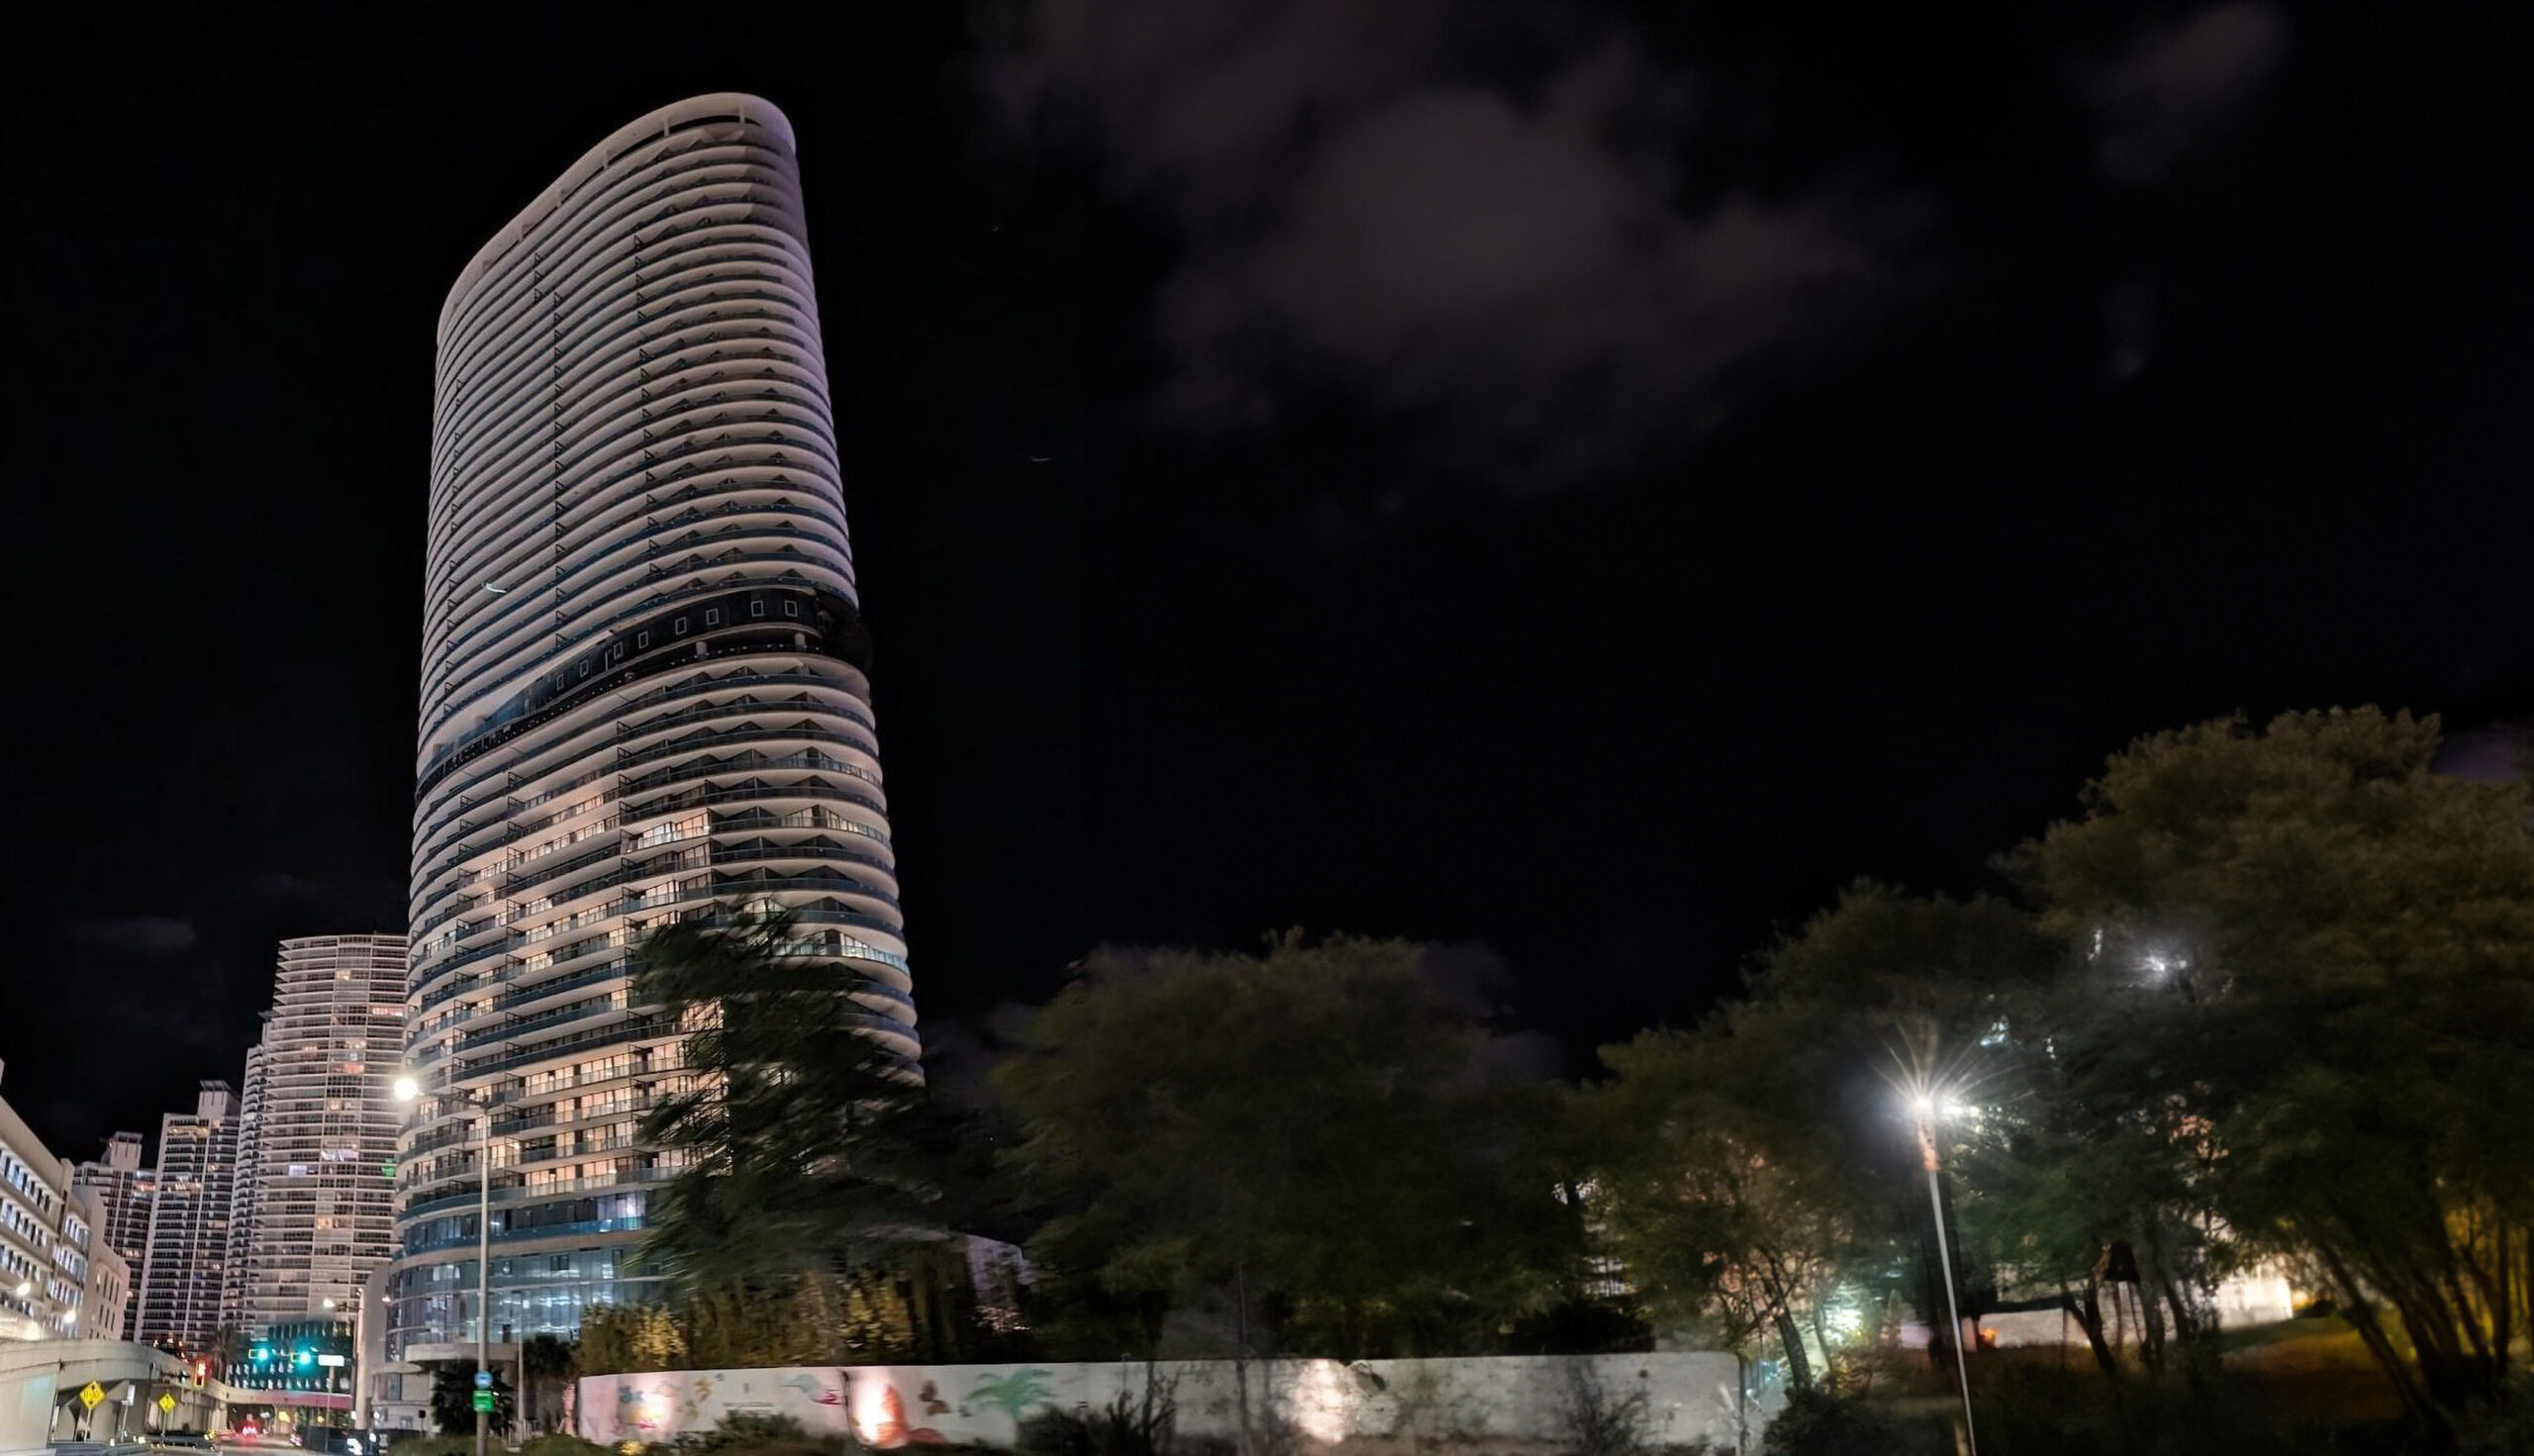 Unveiling the Illuminated Splendor of Five Park Tower in South Beach